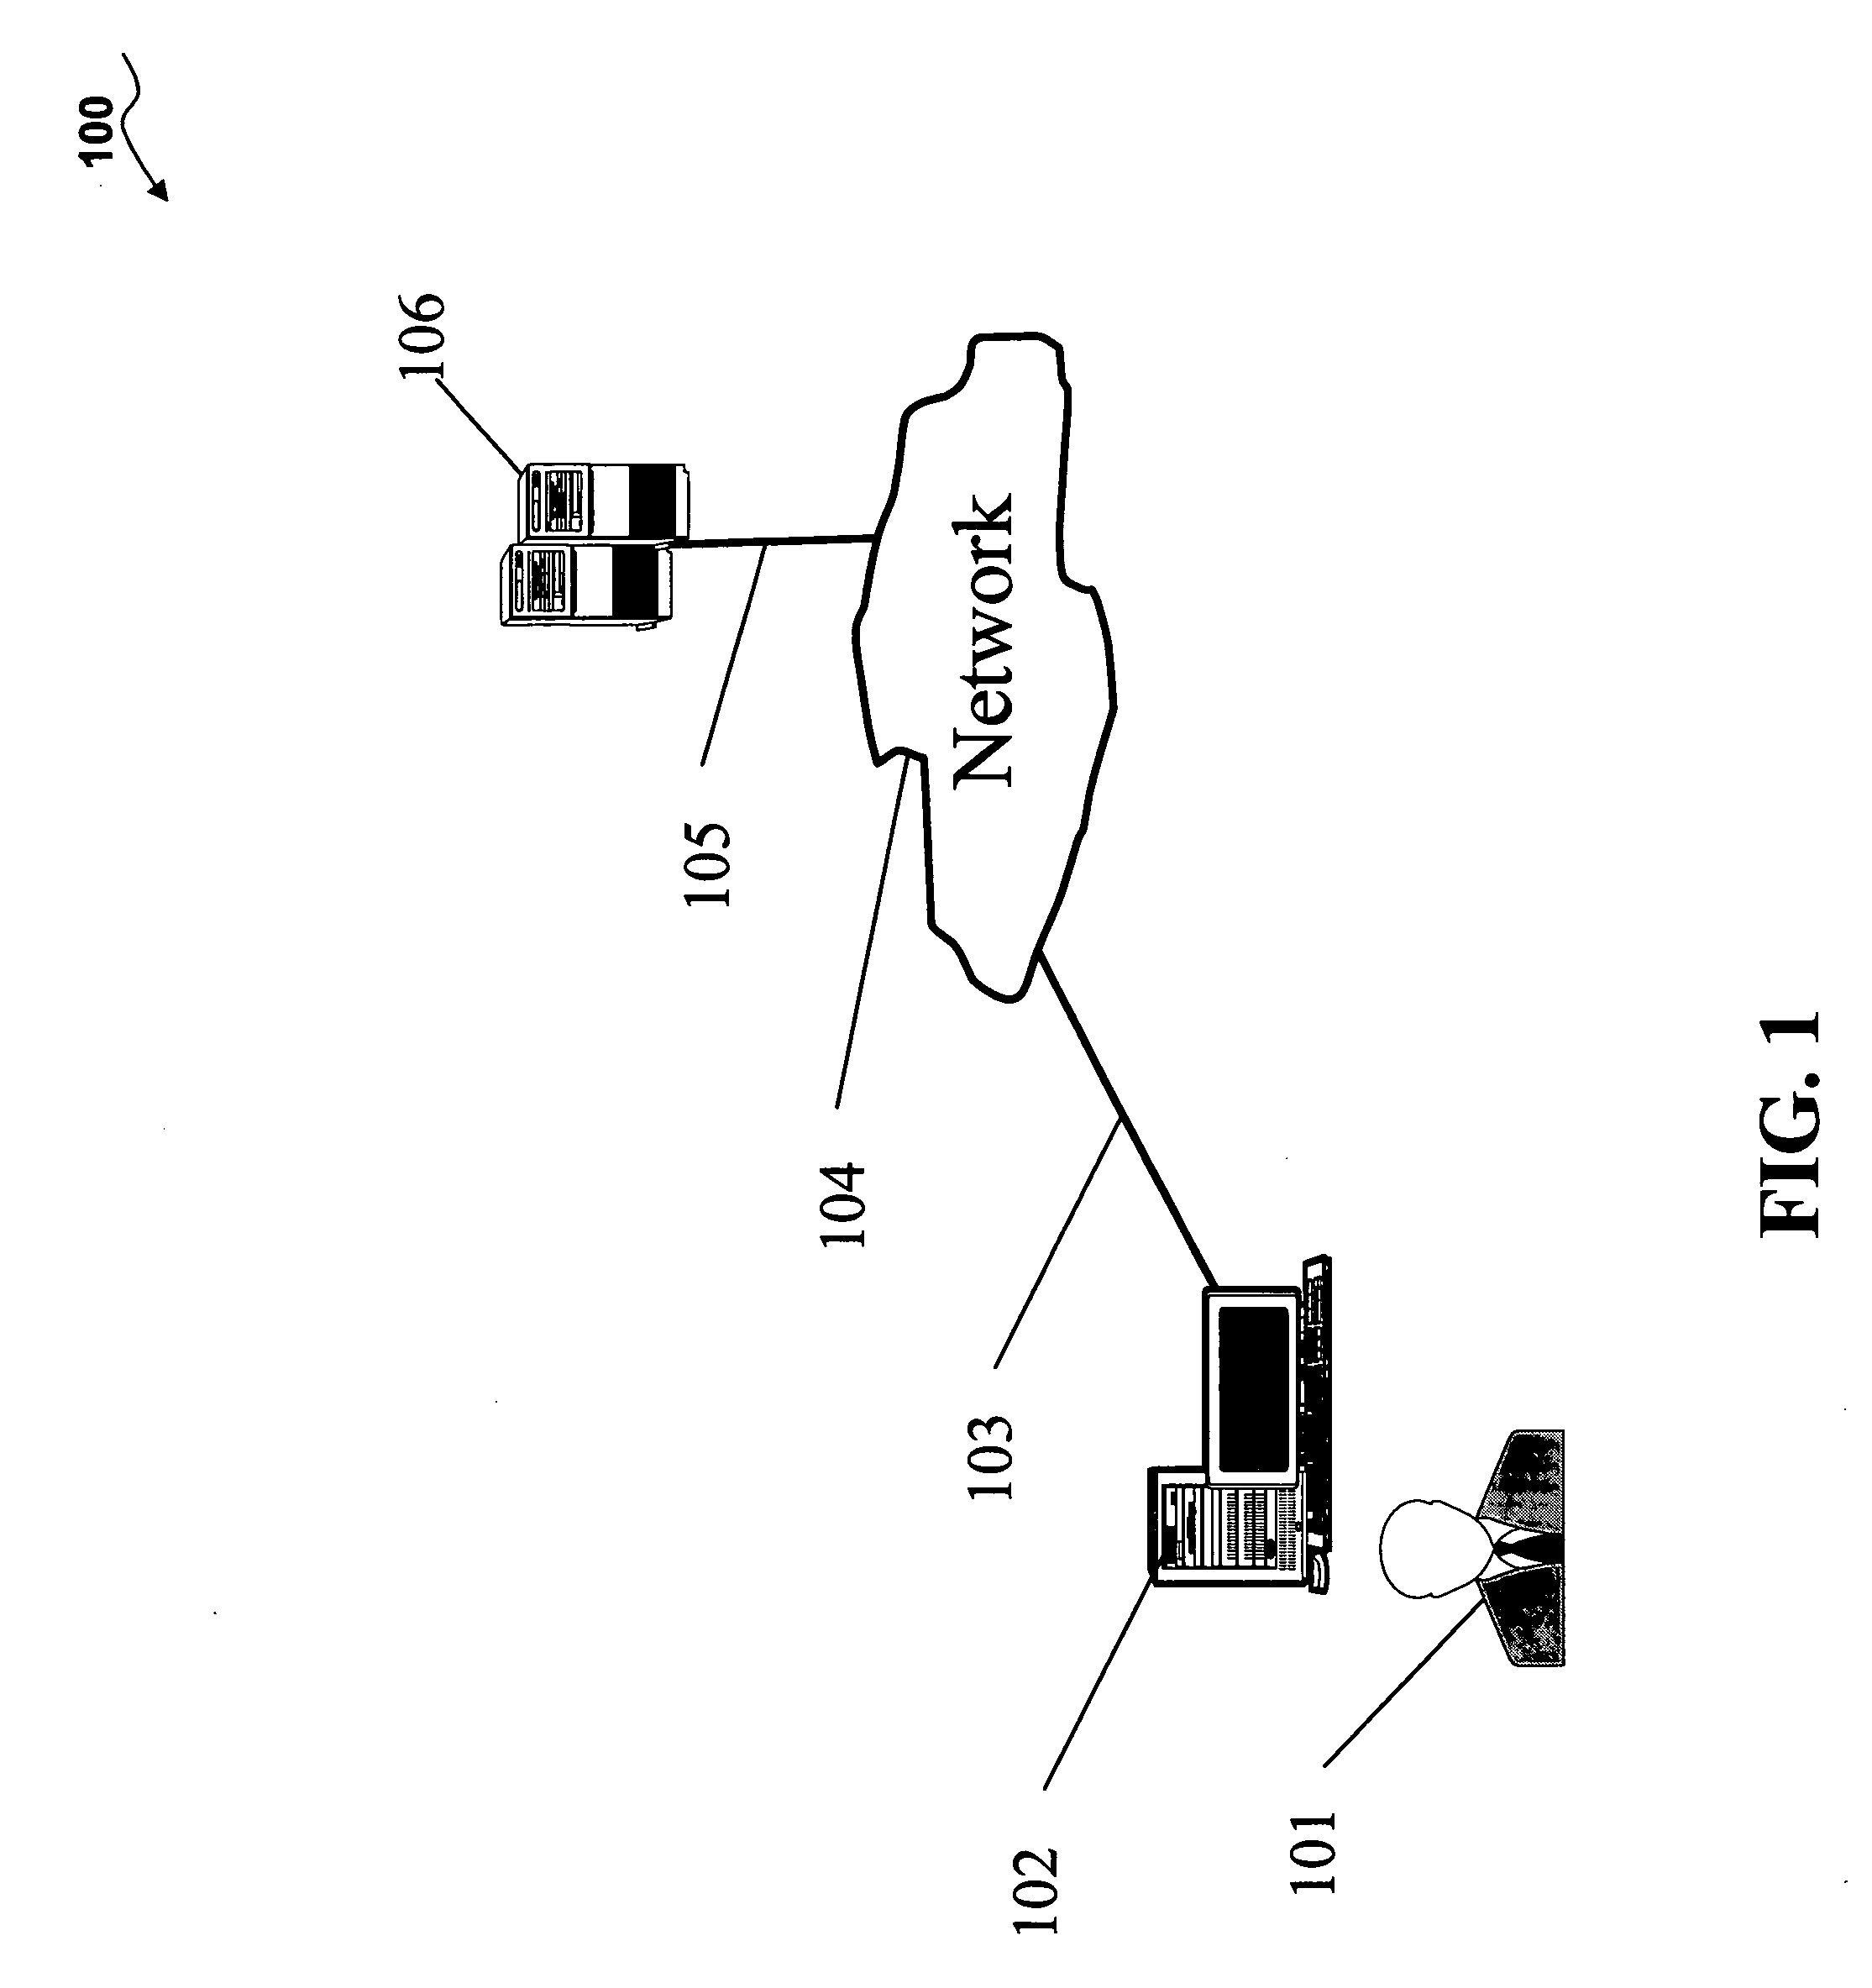 System and method for wikifying content for knowledge navigation and discovery